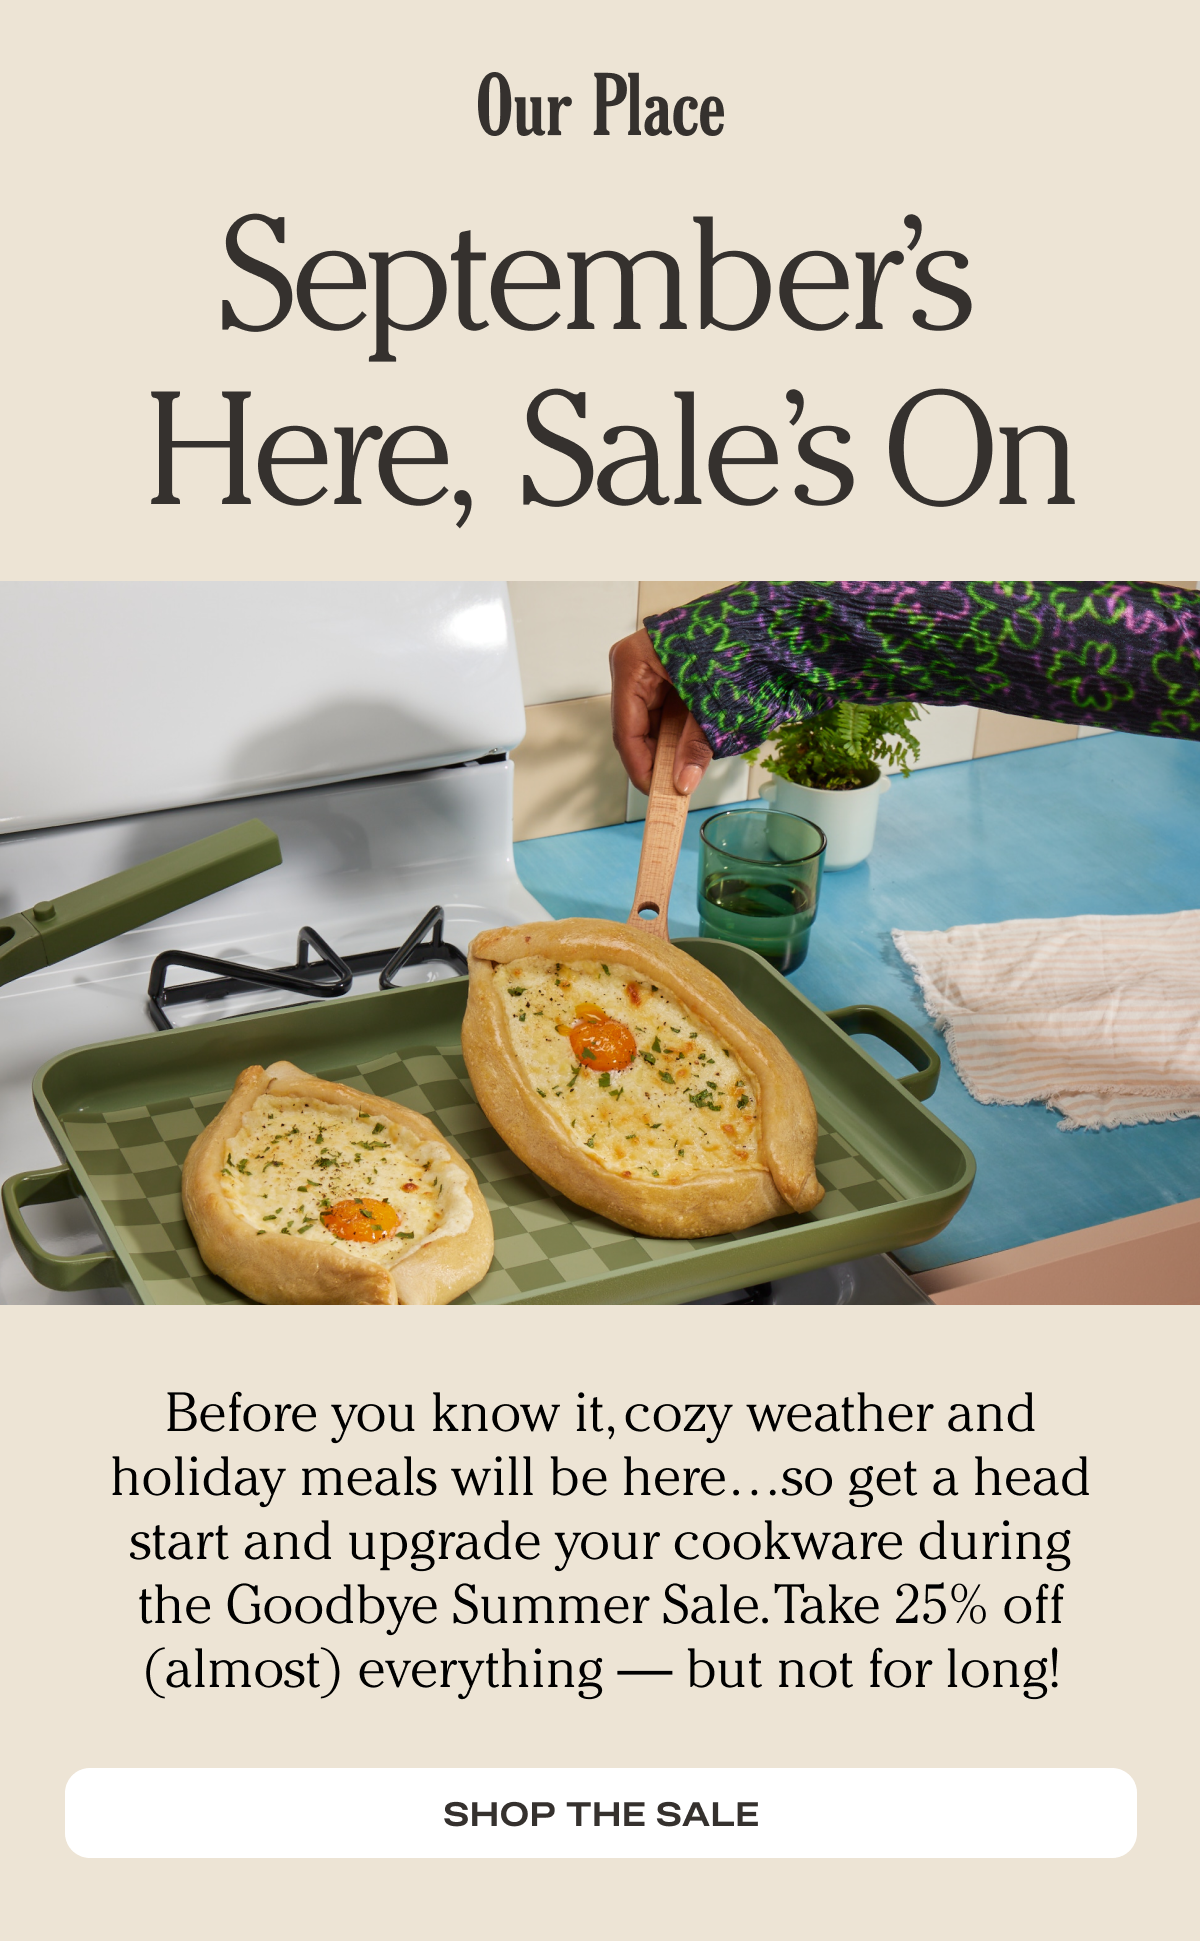 Our Place - Before you know it, cozy weather and holiday meals will be here…so get a head start and upgrade your cookware during the Goodbye Summer Sale. Take 25% off (almost) everything — but not for long!  - Shop the sale